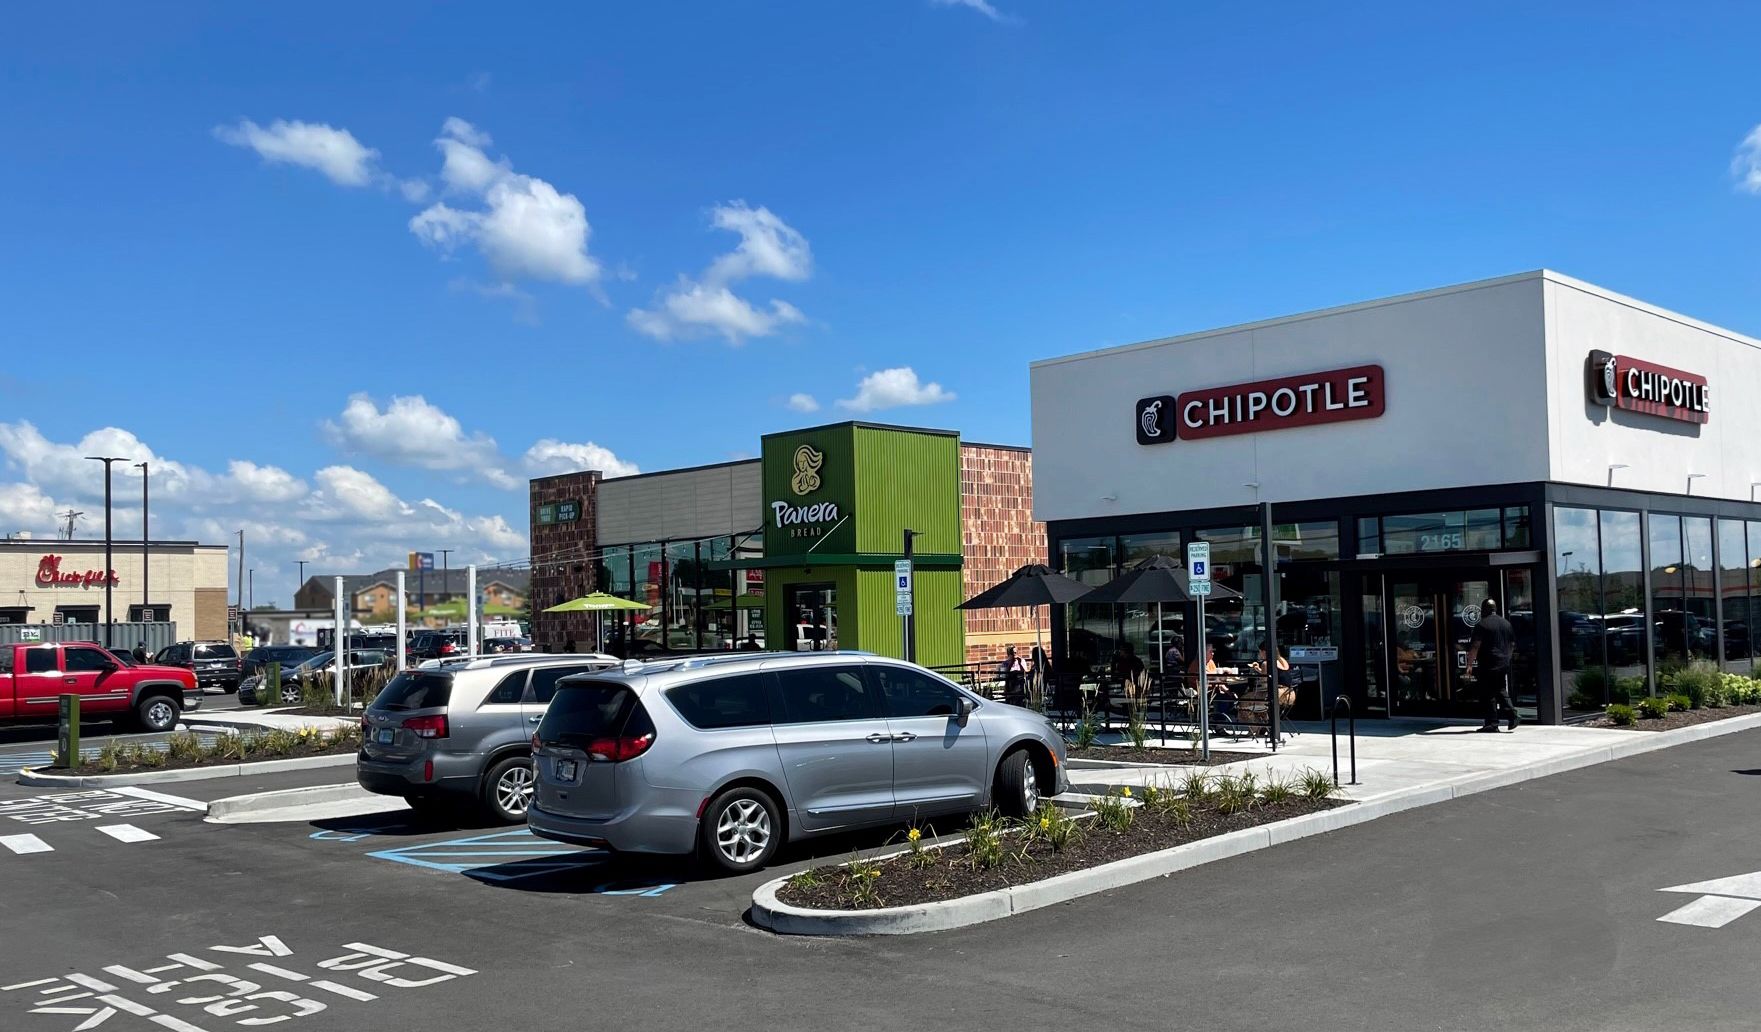 Hanley Investment Group Arranges $9 Million in Record-Breaking Single-Tenant QSR Drive-Thru Pre-Sale Transactions in Indianapolis Metro